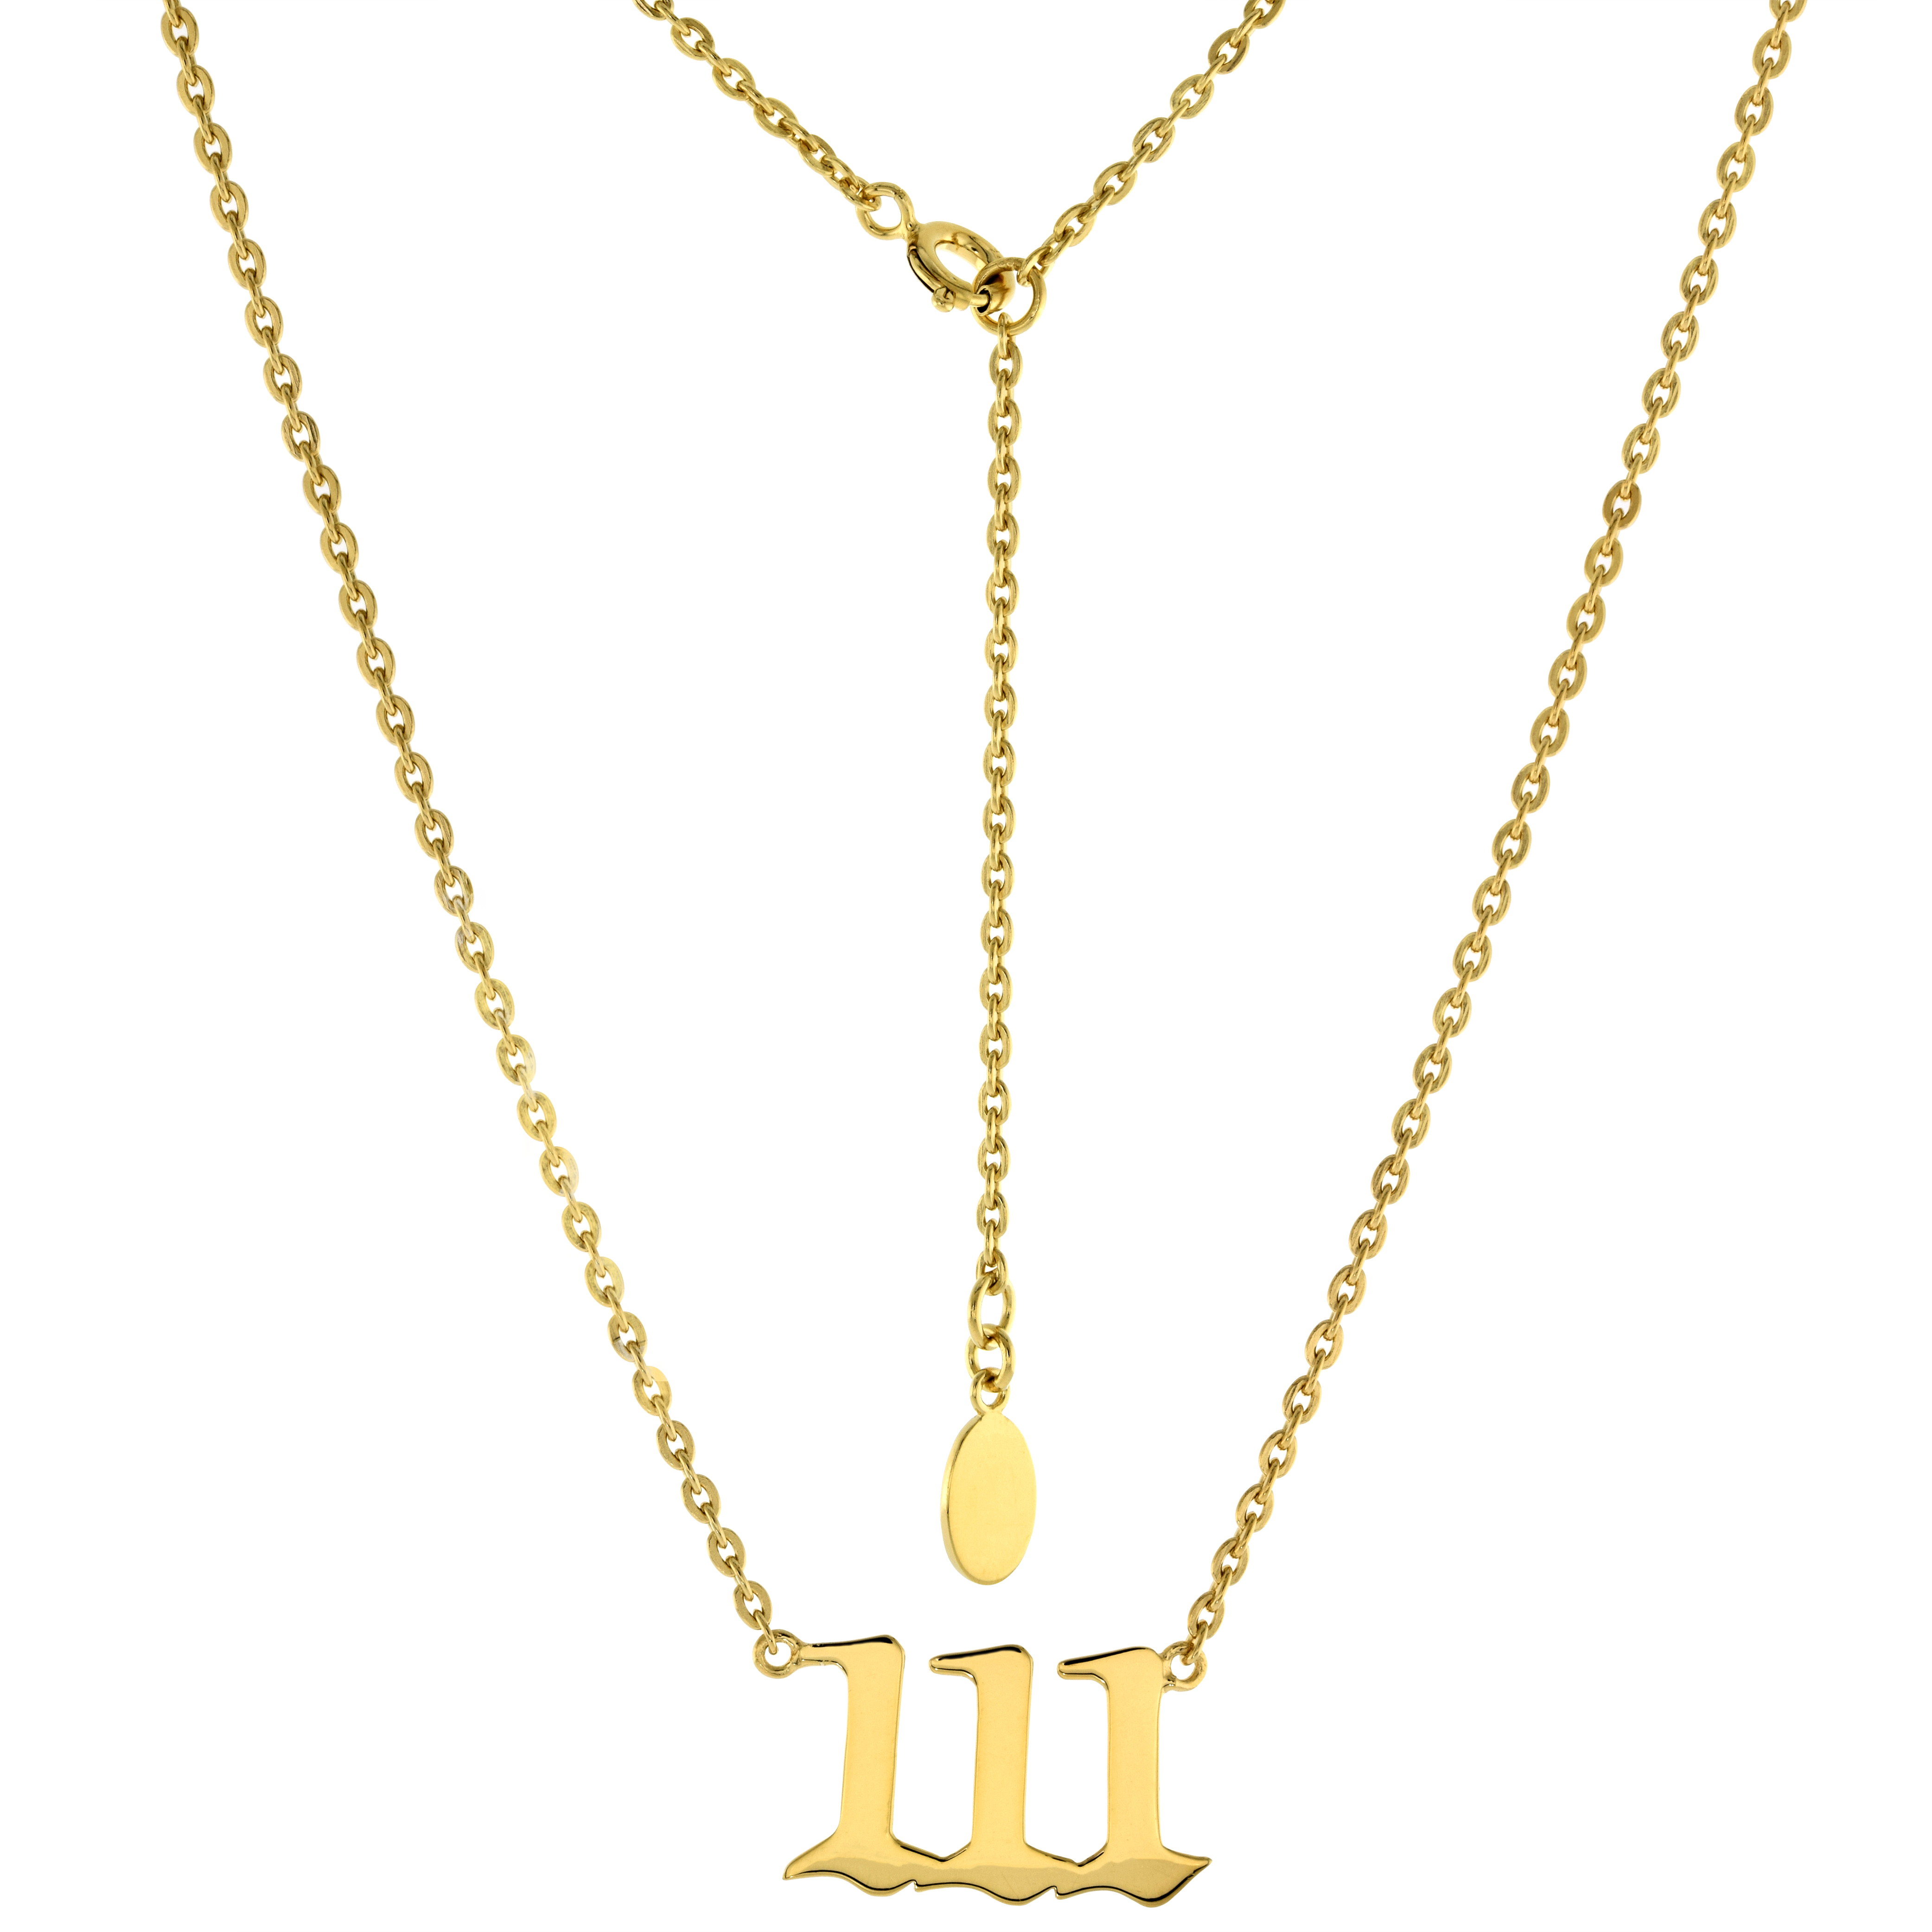 Gold Plated Sterling Silver Numerology Angel Number Necklace 111 for Women Non Tarnish 1 inch wide fits 16-18 inches